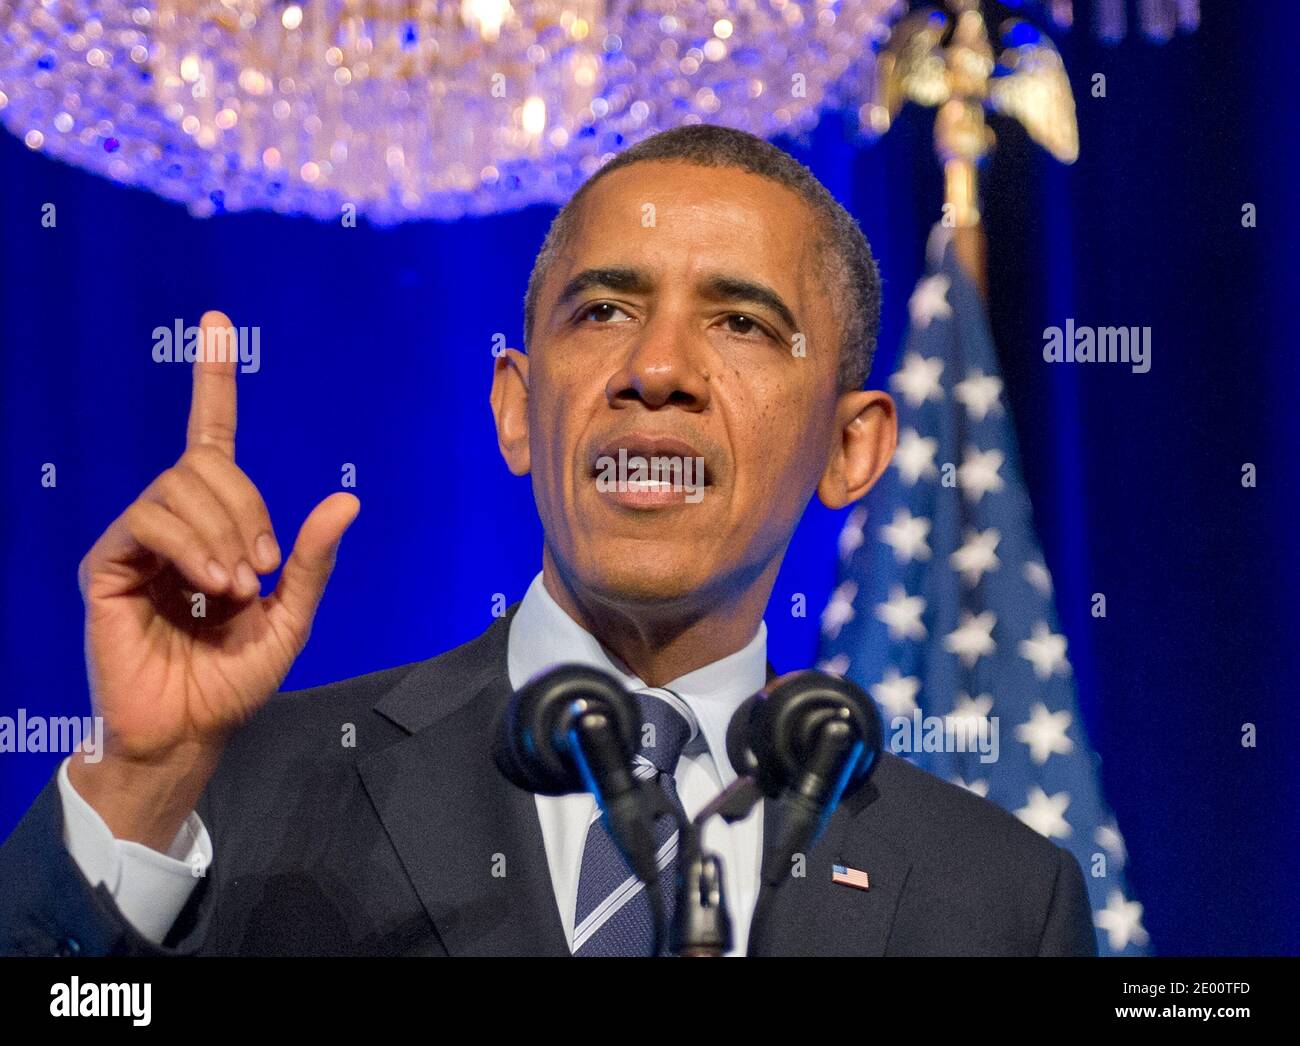 United States President Barack Obama delivers remarks at an Organizing for Action 'Obamacare Summit' at the St. Regis Hotel in Washington, DC, USA, on Monday, November 4, 2013. Photo by Ron Sachs/Pool/ABACAPRESS.COM Stock Photo